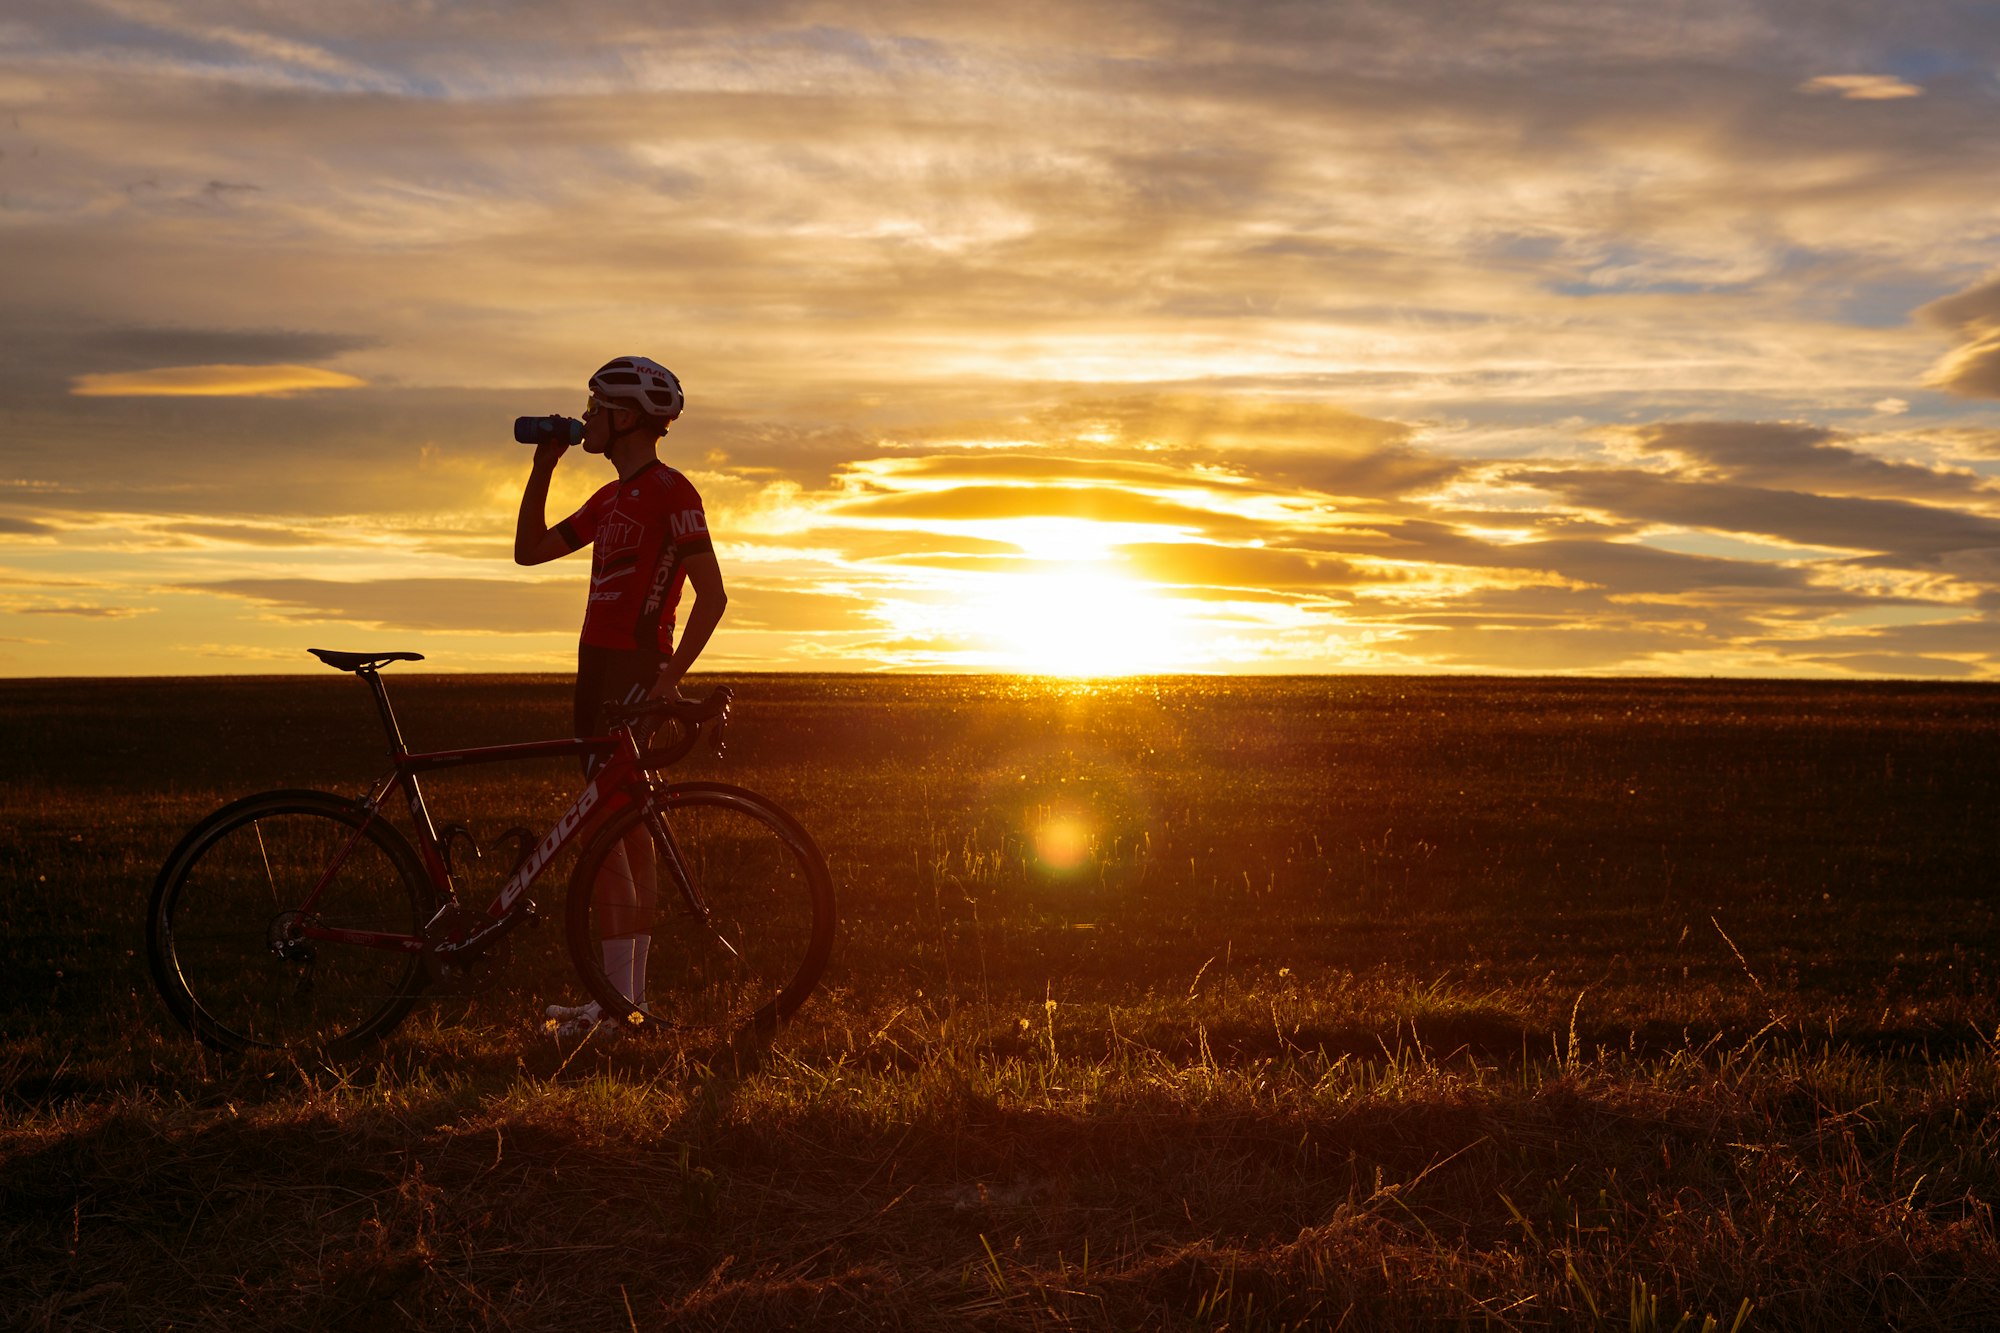 A cyclist taking a drink at sunset.